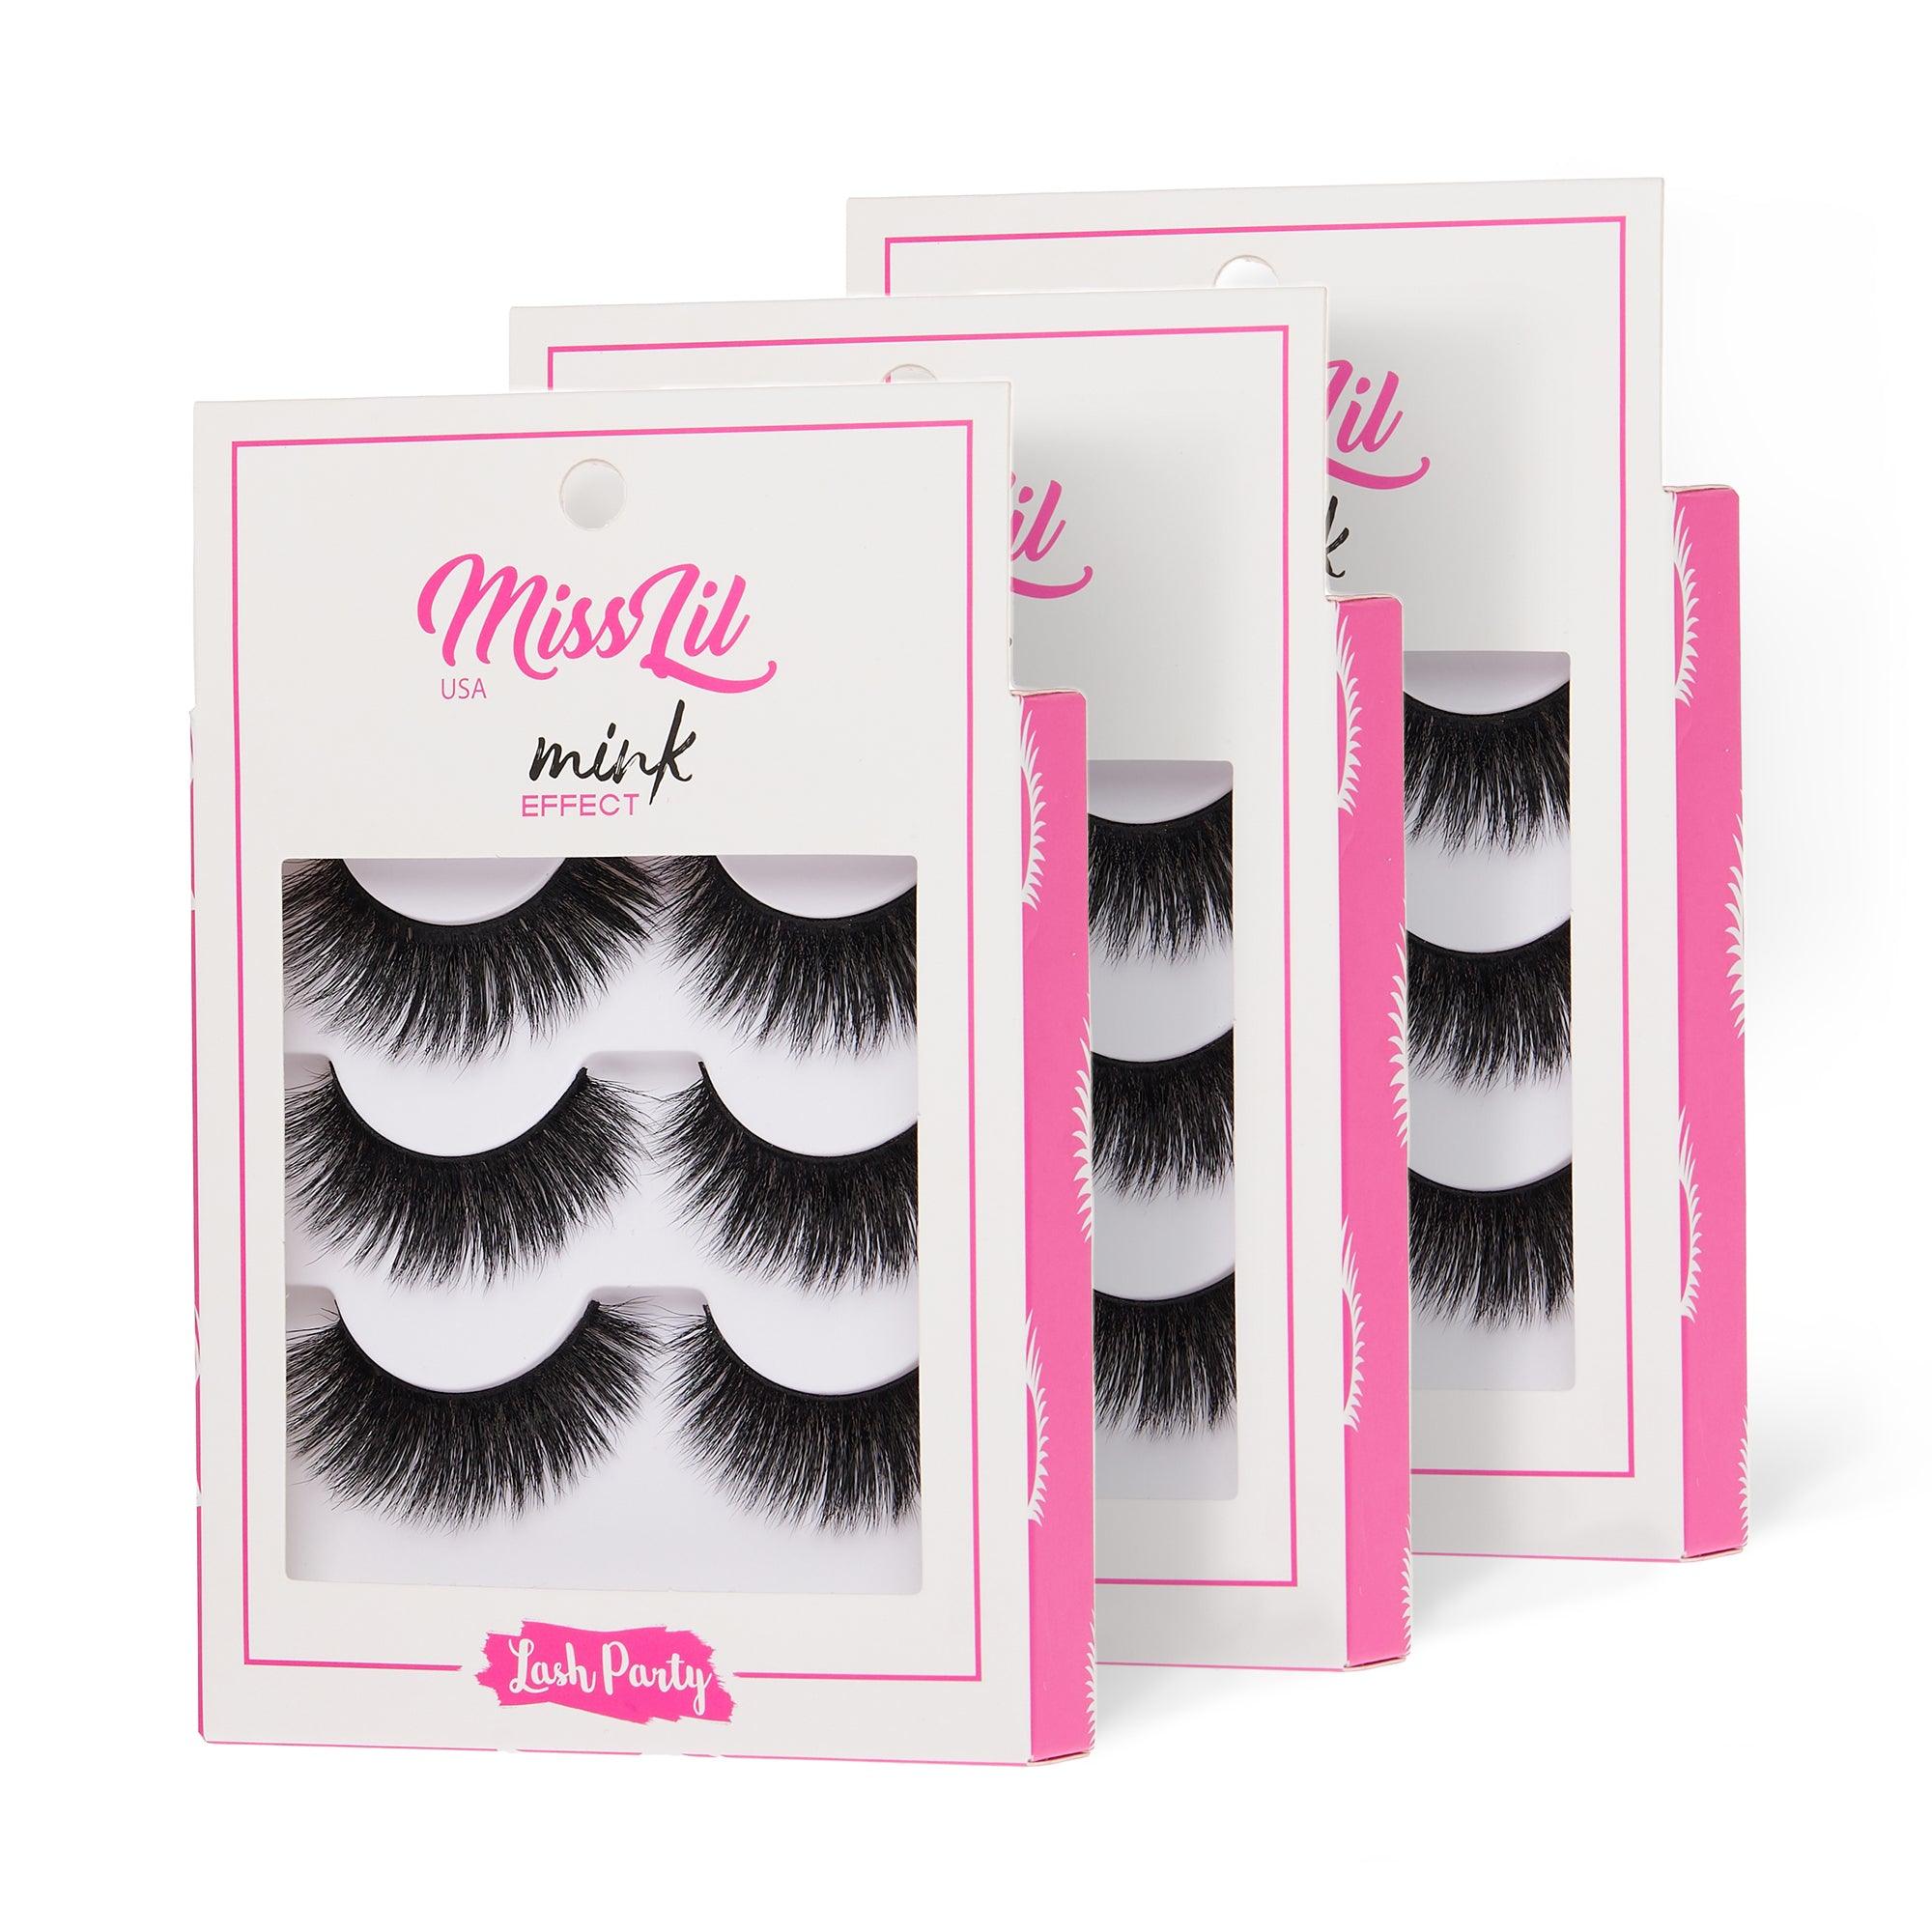 3-Pair Faux Mink Effect Eyelashes - Lash Party Collection #9 - Pack of 3 - Miss Lil USA